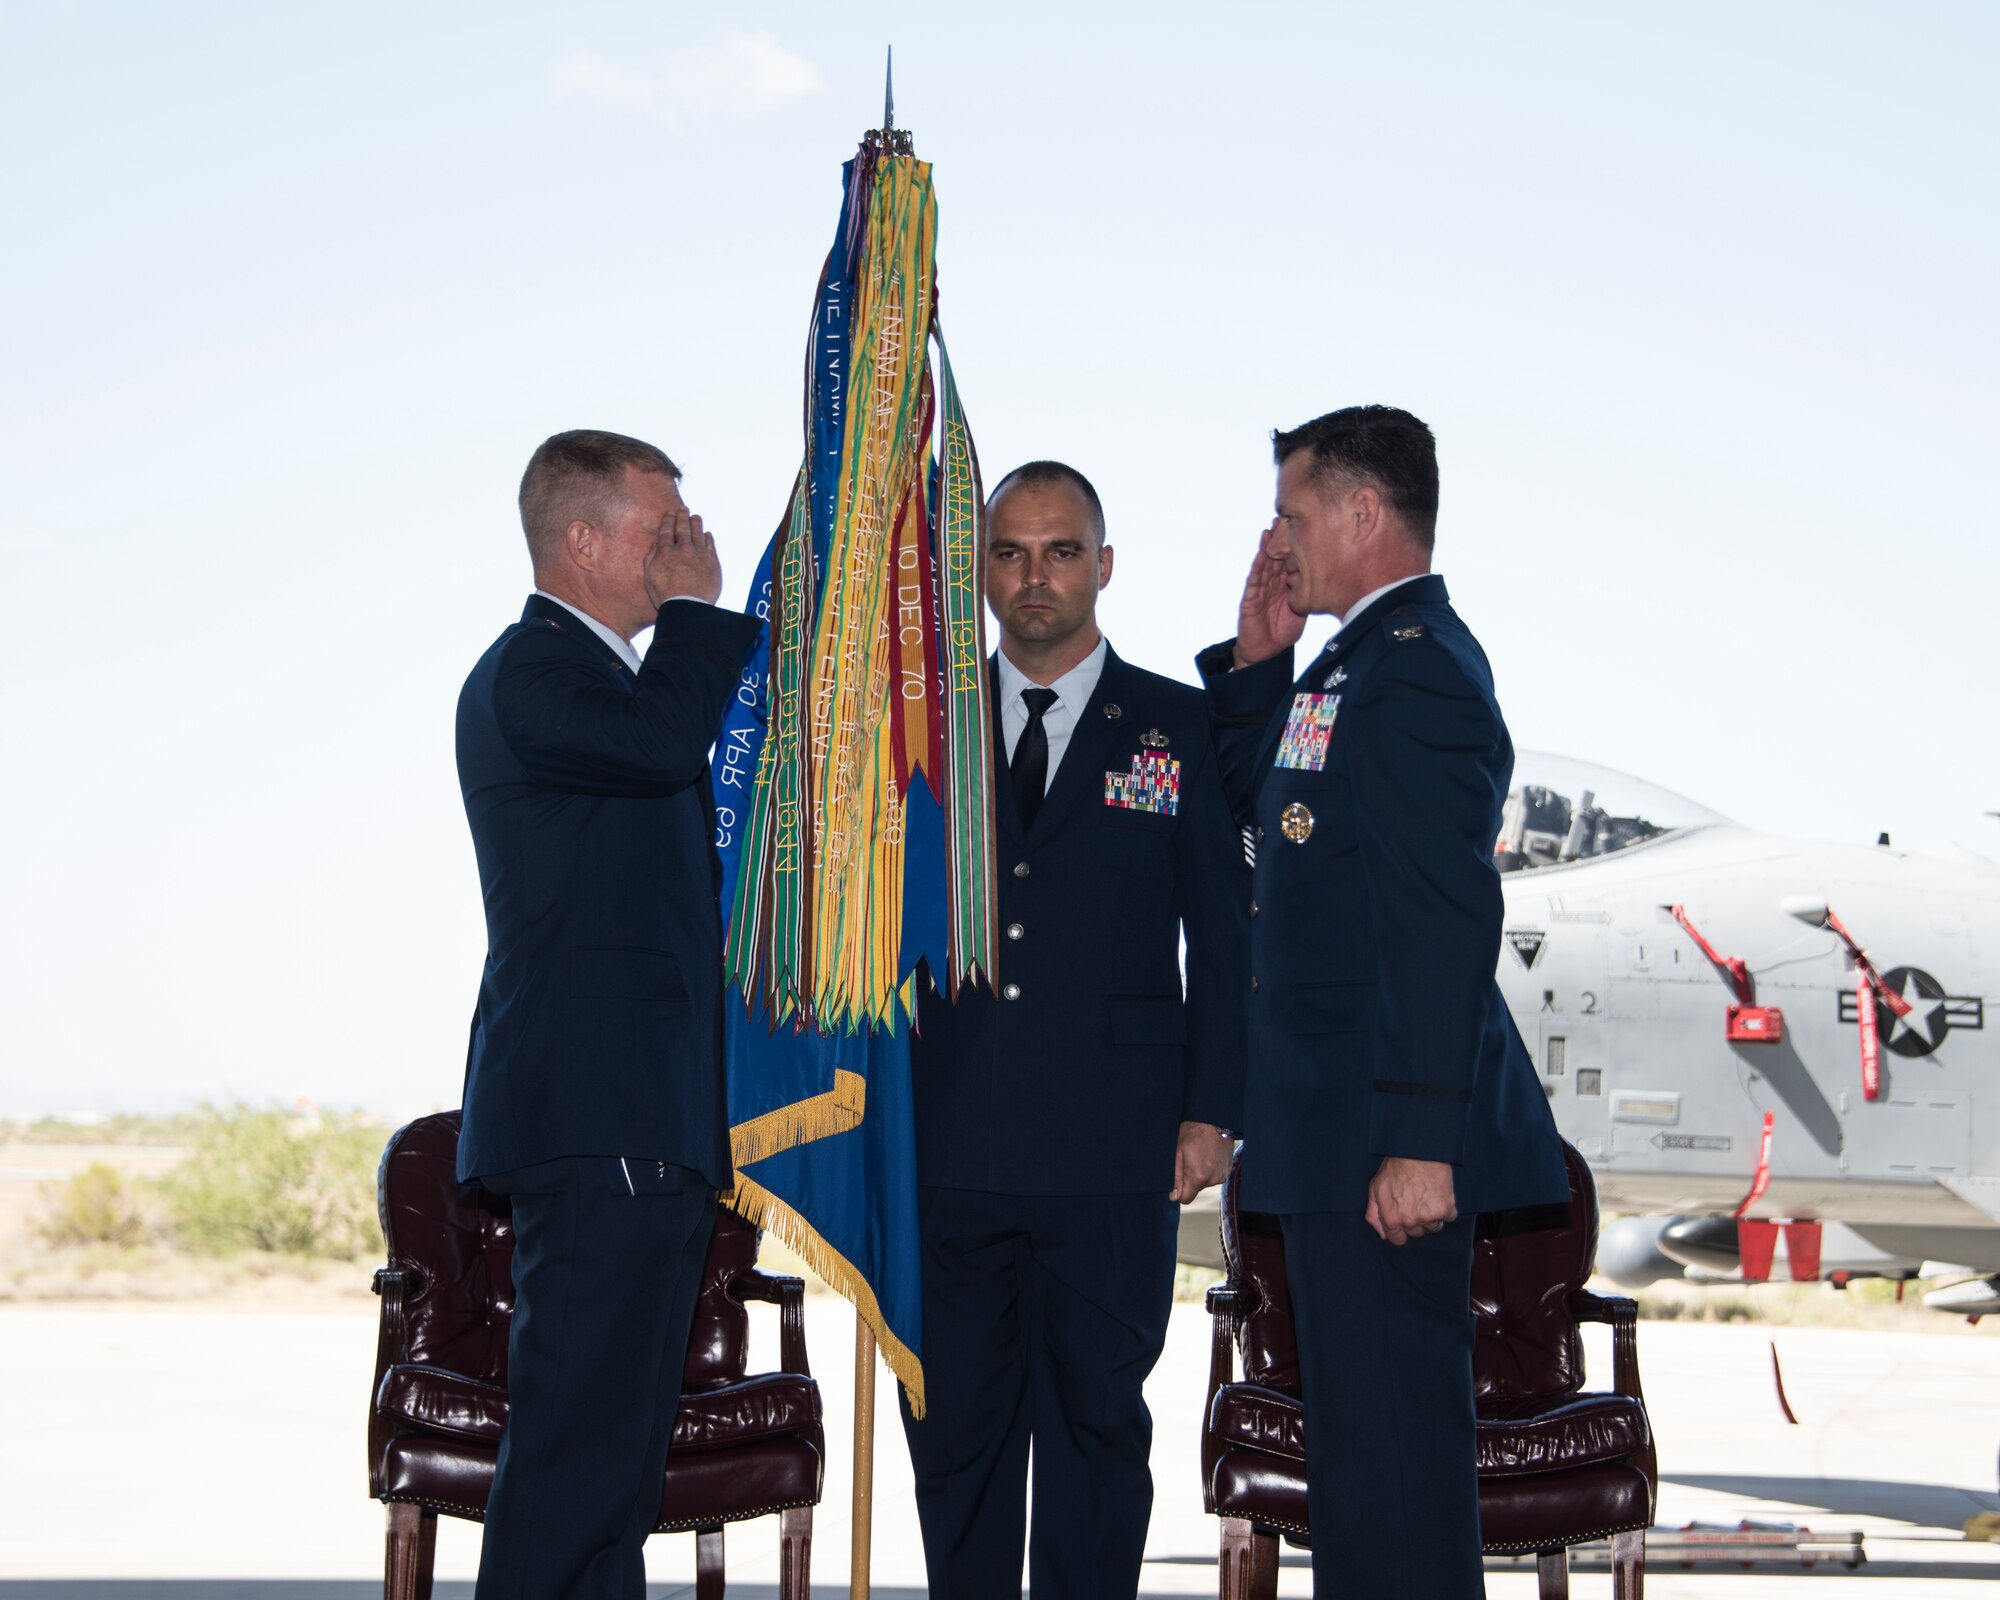 A photo of Airmen during a change of command ceremony